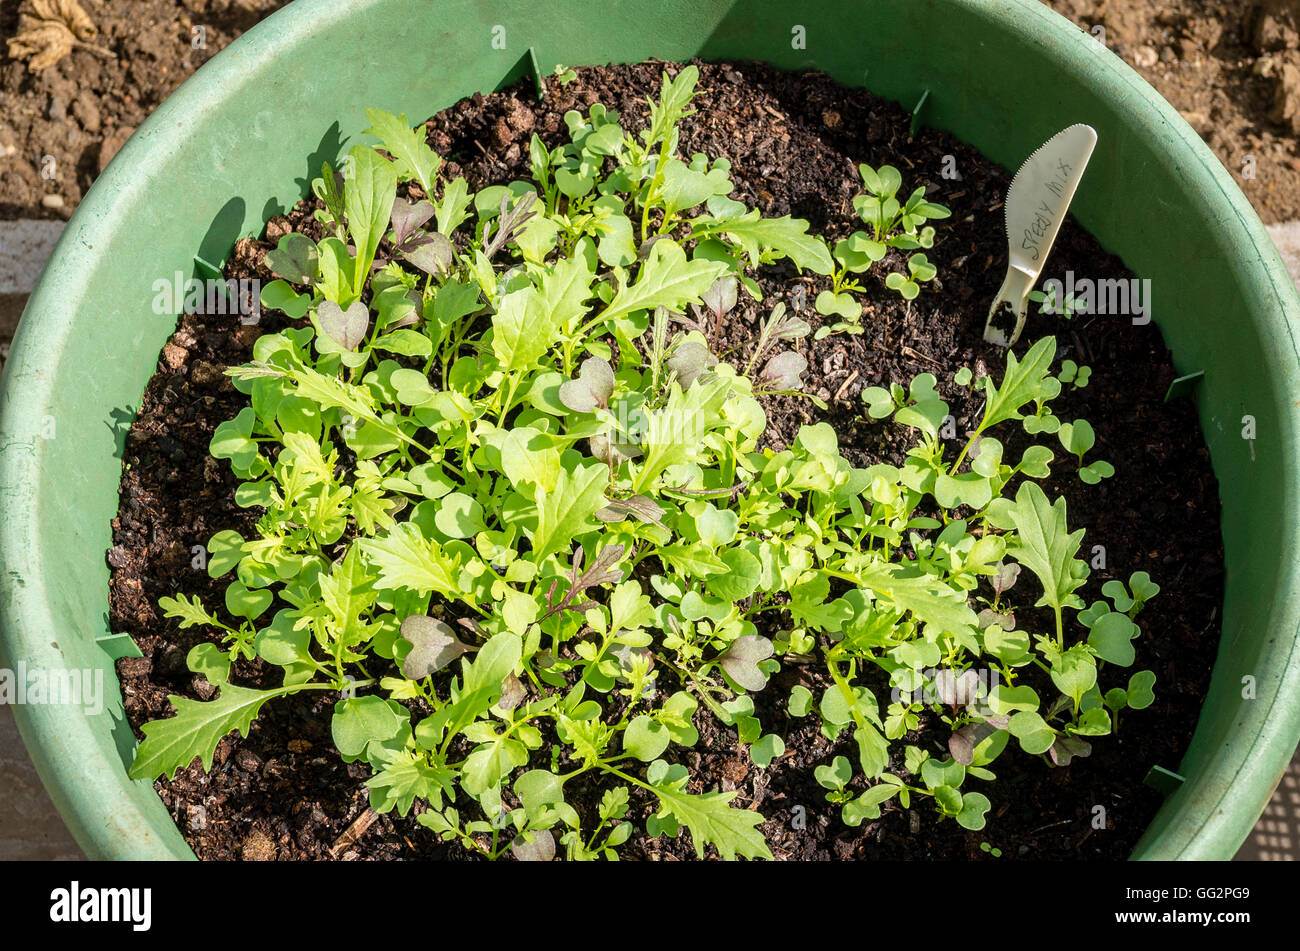 Two weeks after sowing seeds mixed salad leaves are quickly growing in a small planter pot Stock Photo